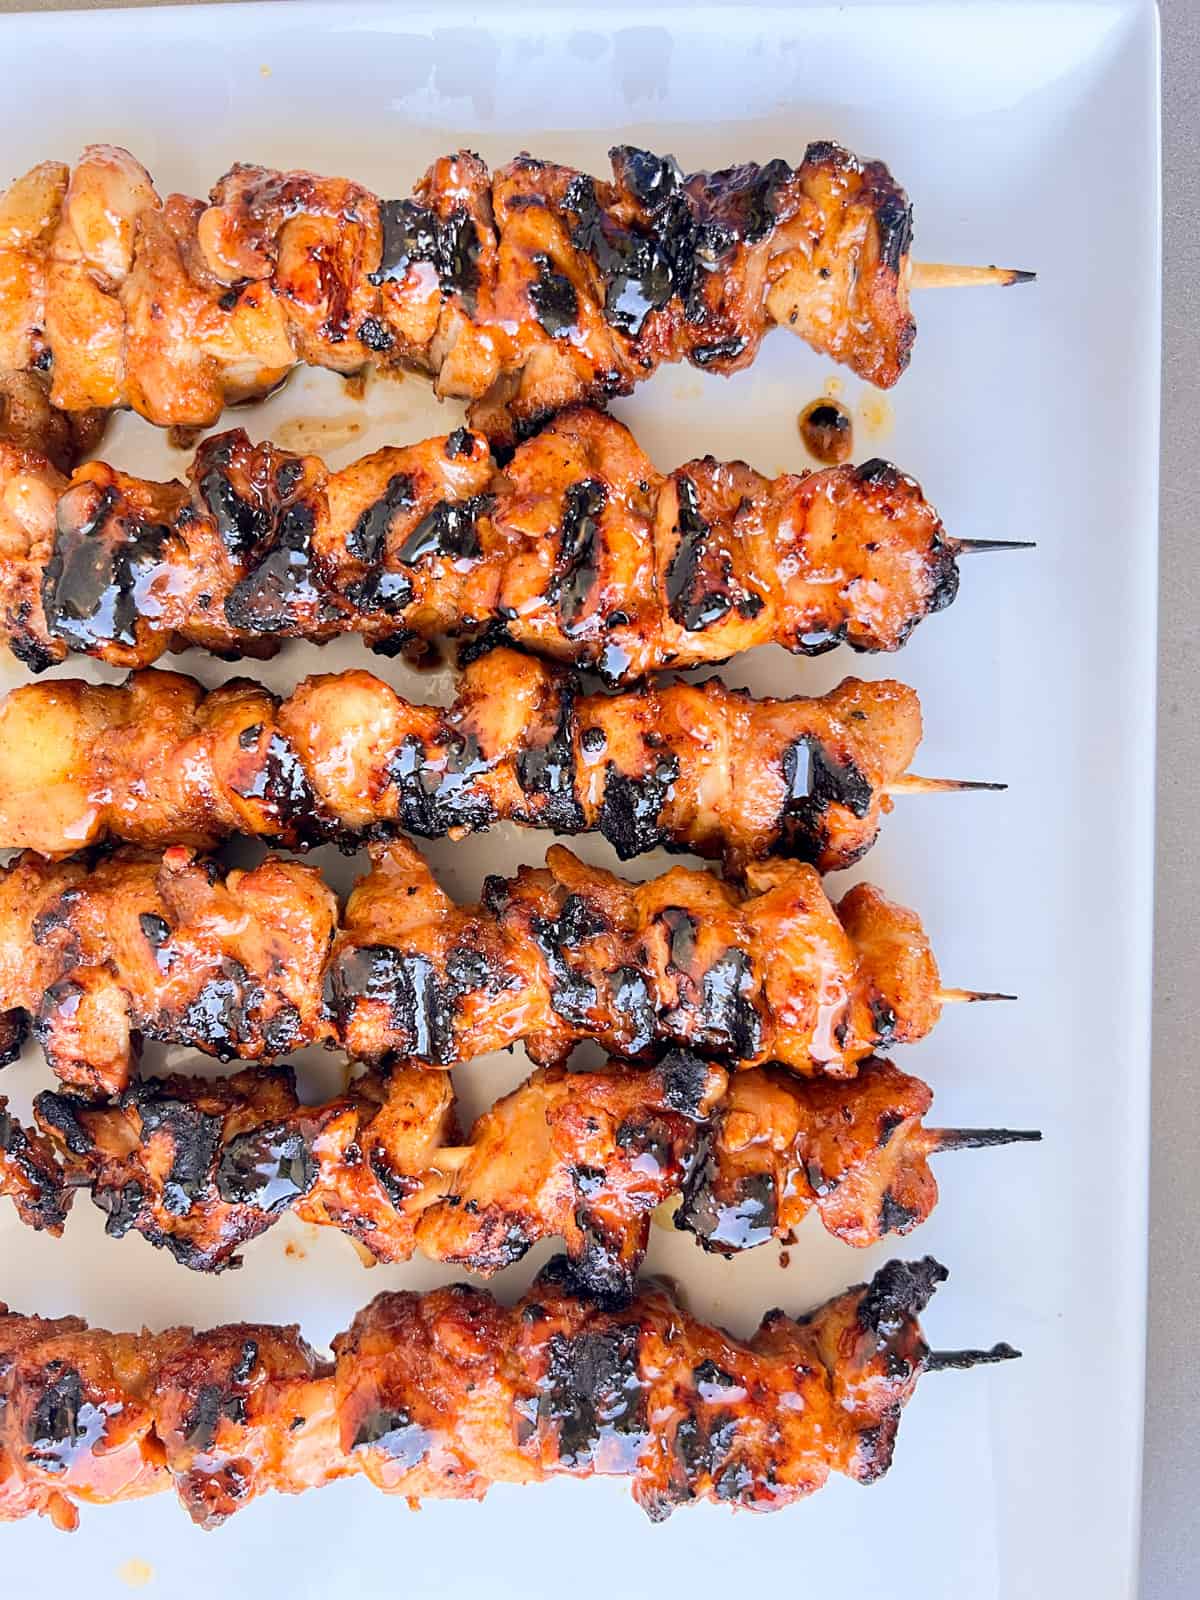 Chicken kabobs on plate with glaze.